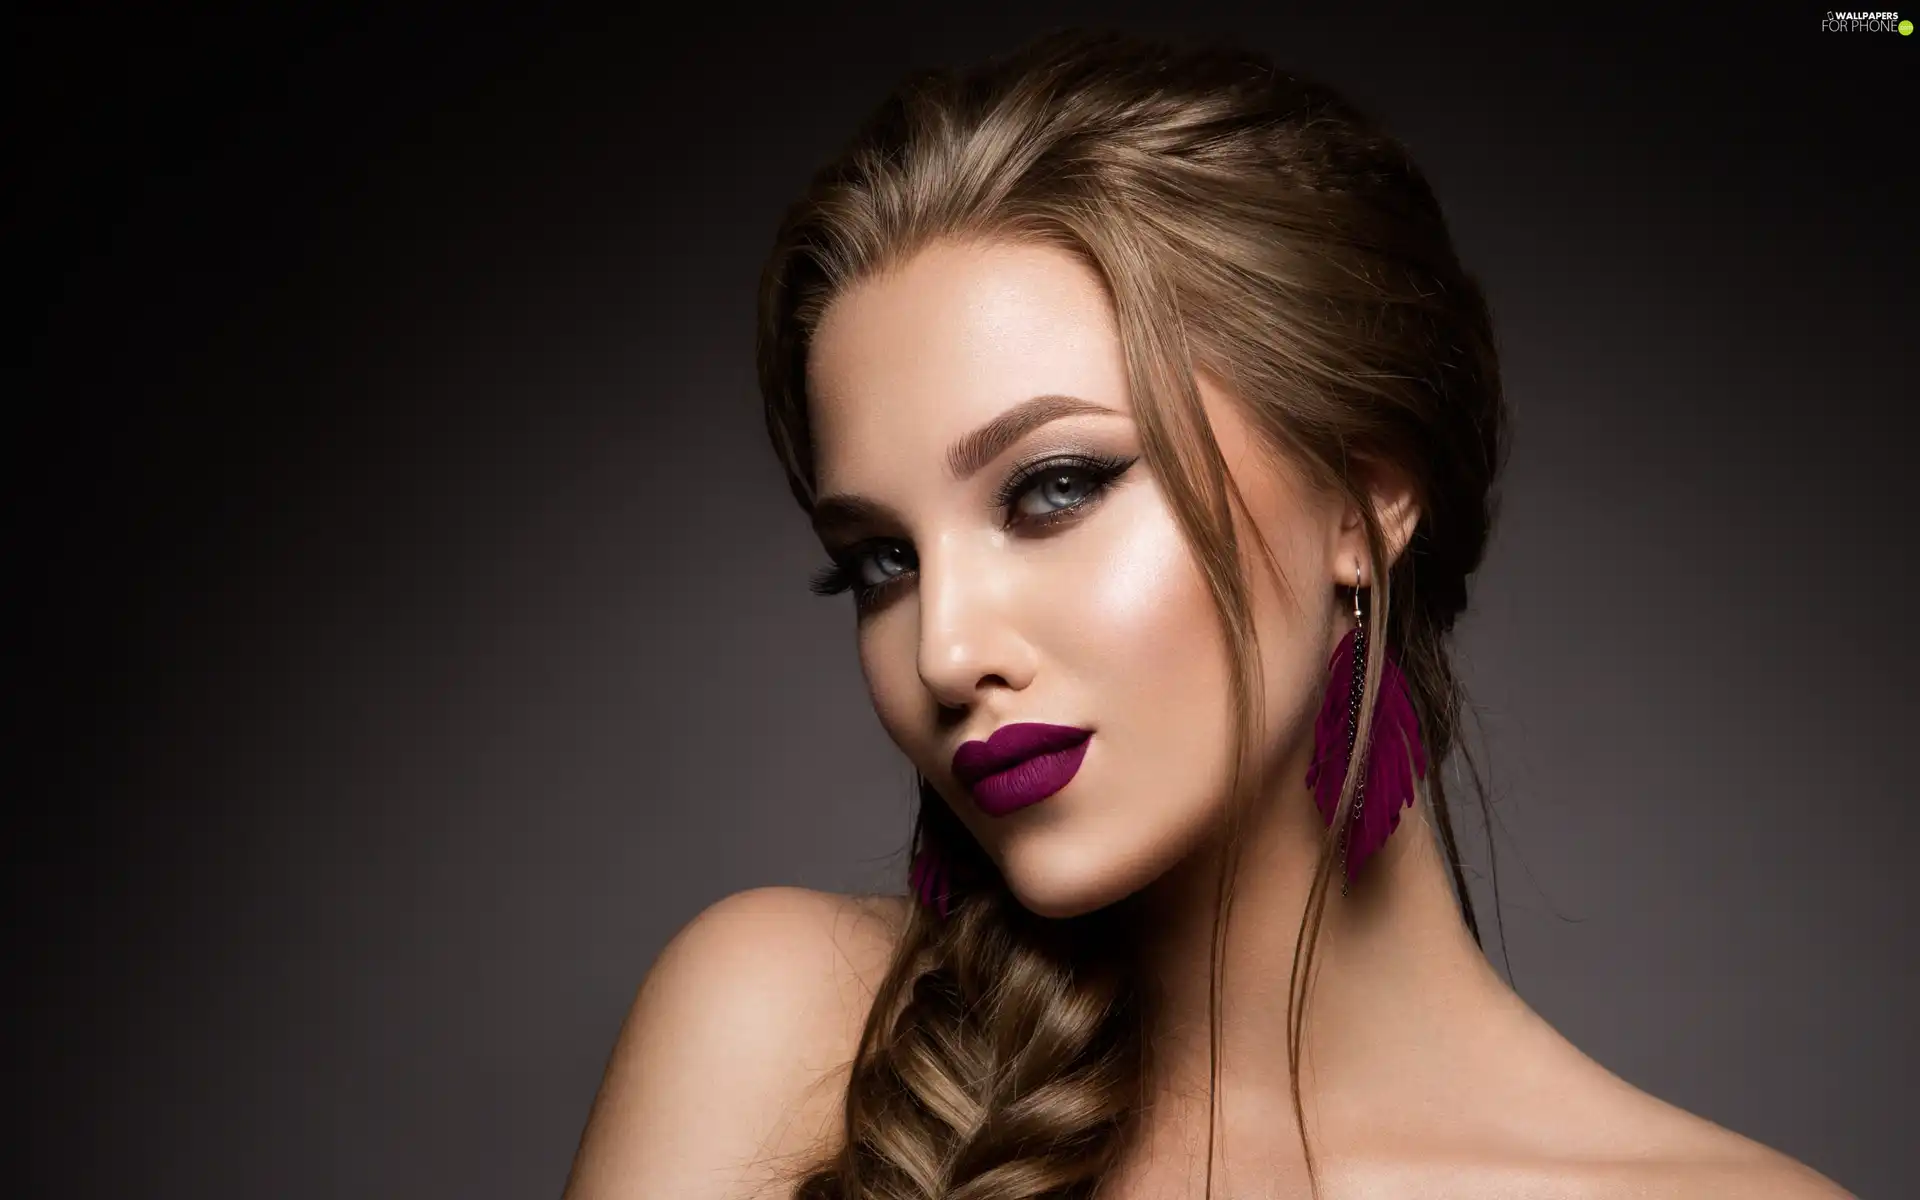 make-up, ear-ring, pigtail, The look, Women